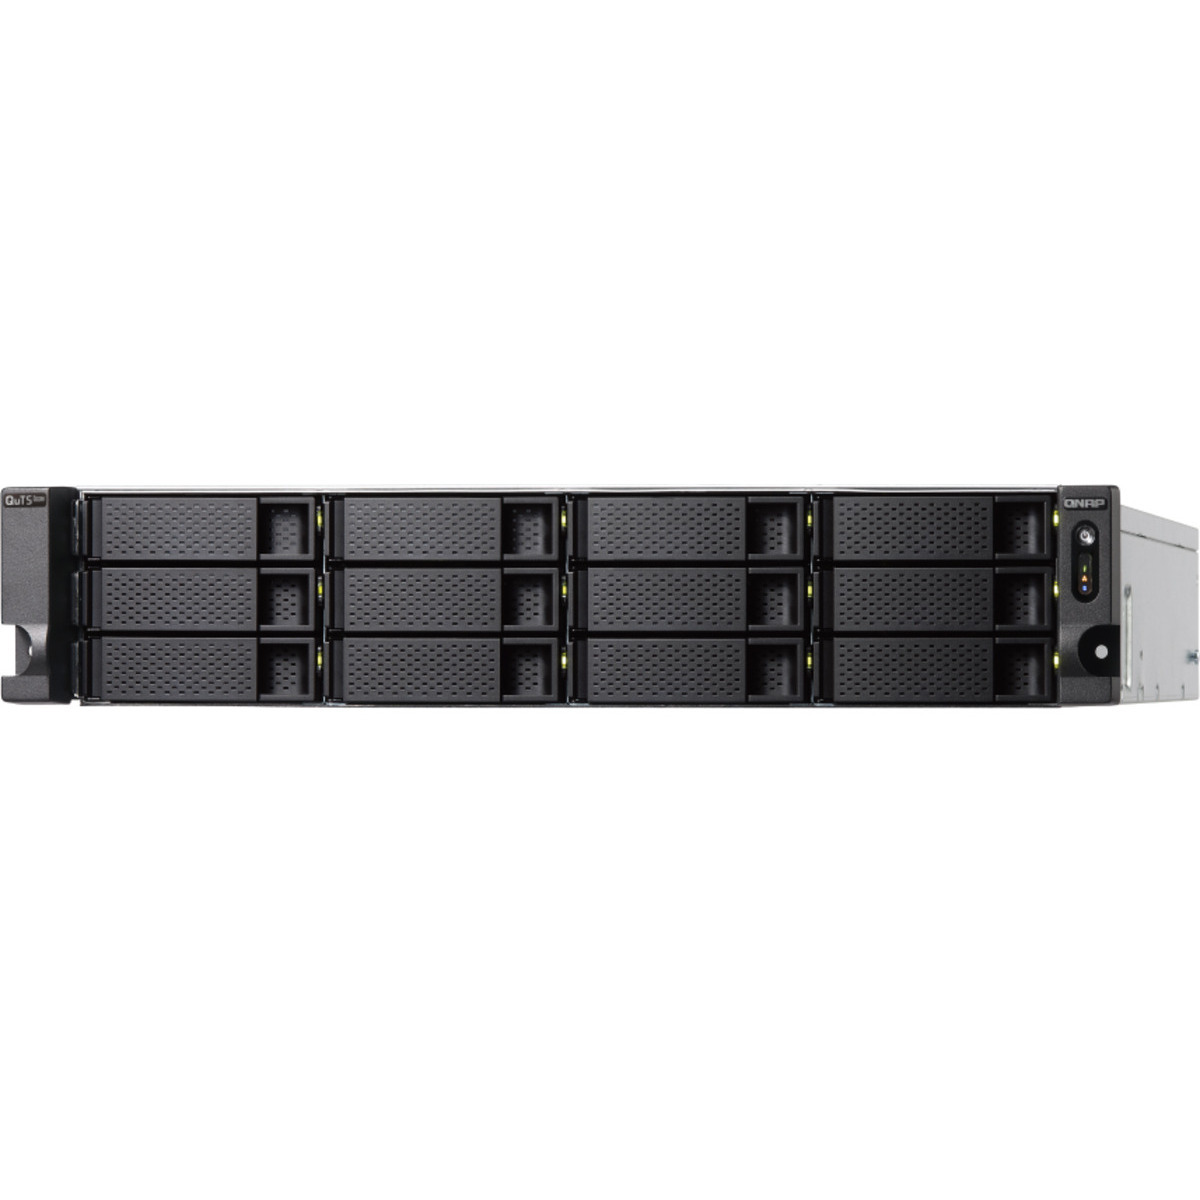 QNAP TS-h1886XU-RP R2 QuTS hero Edition 216tb 12+6-Bay RackMount Large Business / Enterprise NAS - Network Attached Storage Device 9x24tb Western Digital Red Pro WD240KFGX 3.5 7200rpm SATA 6Gb/s HDD NAS Class Drives Installed - Burn-In Tested TS-h1886XU-RP R2 QuTS hero Edition